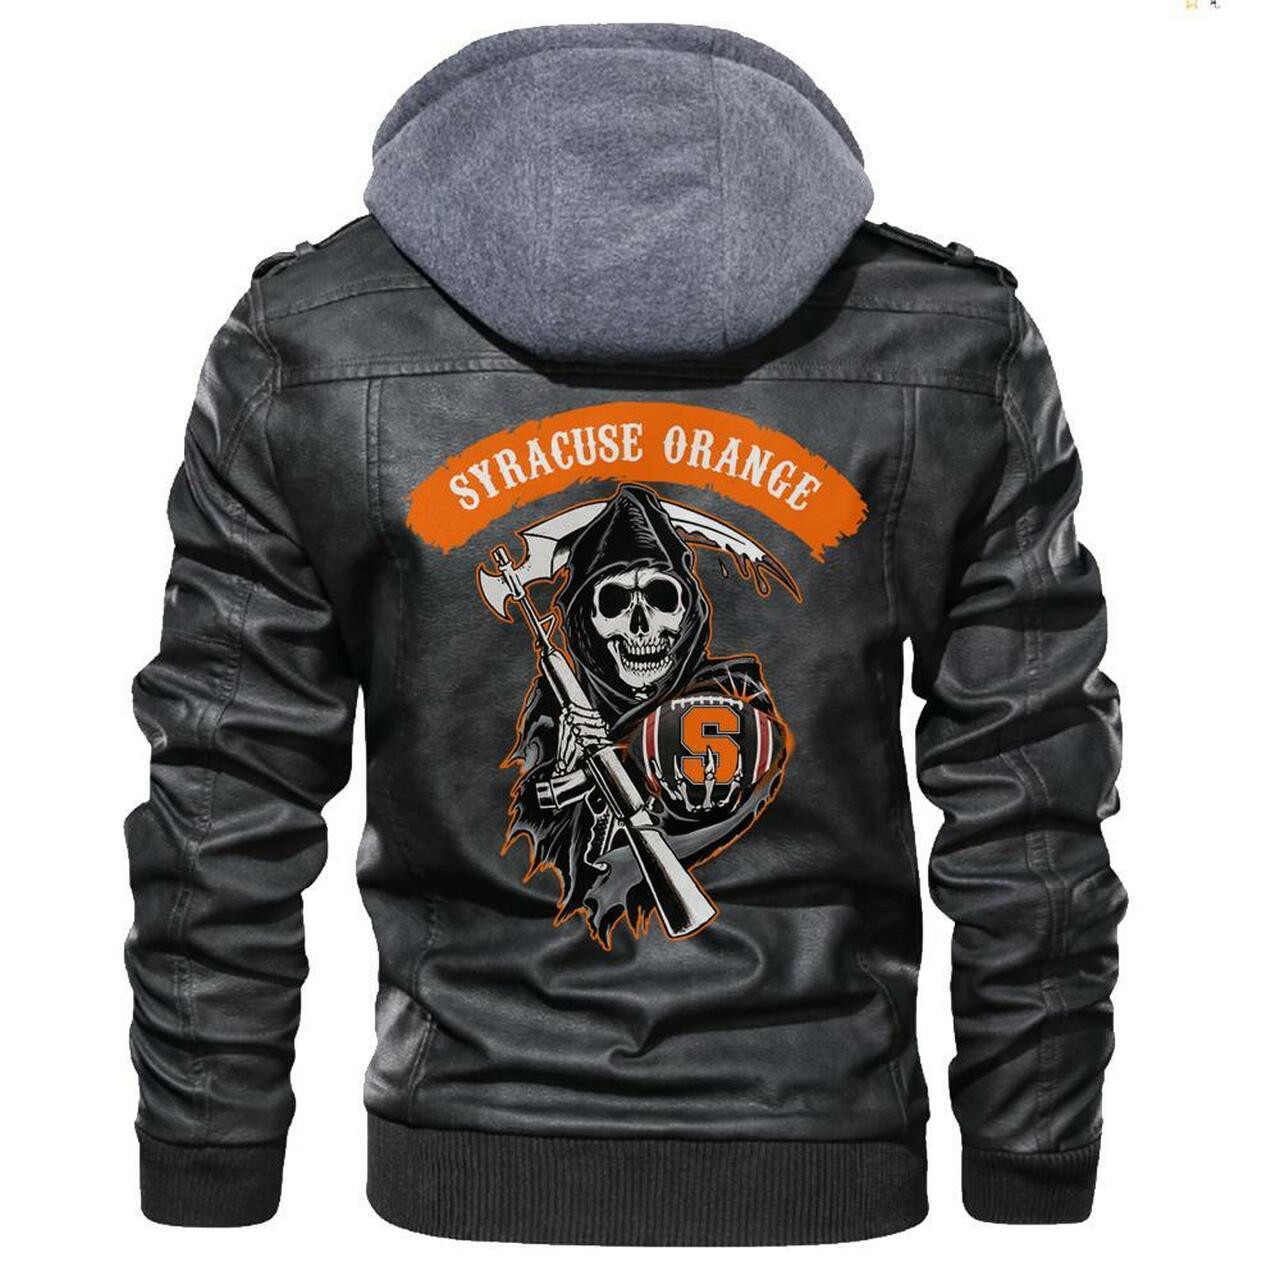 Our store has all of the latest leather jacket 30